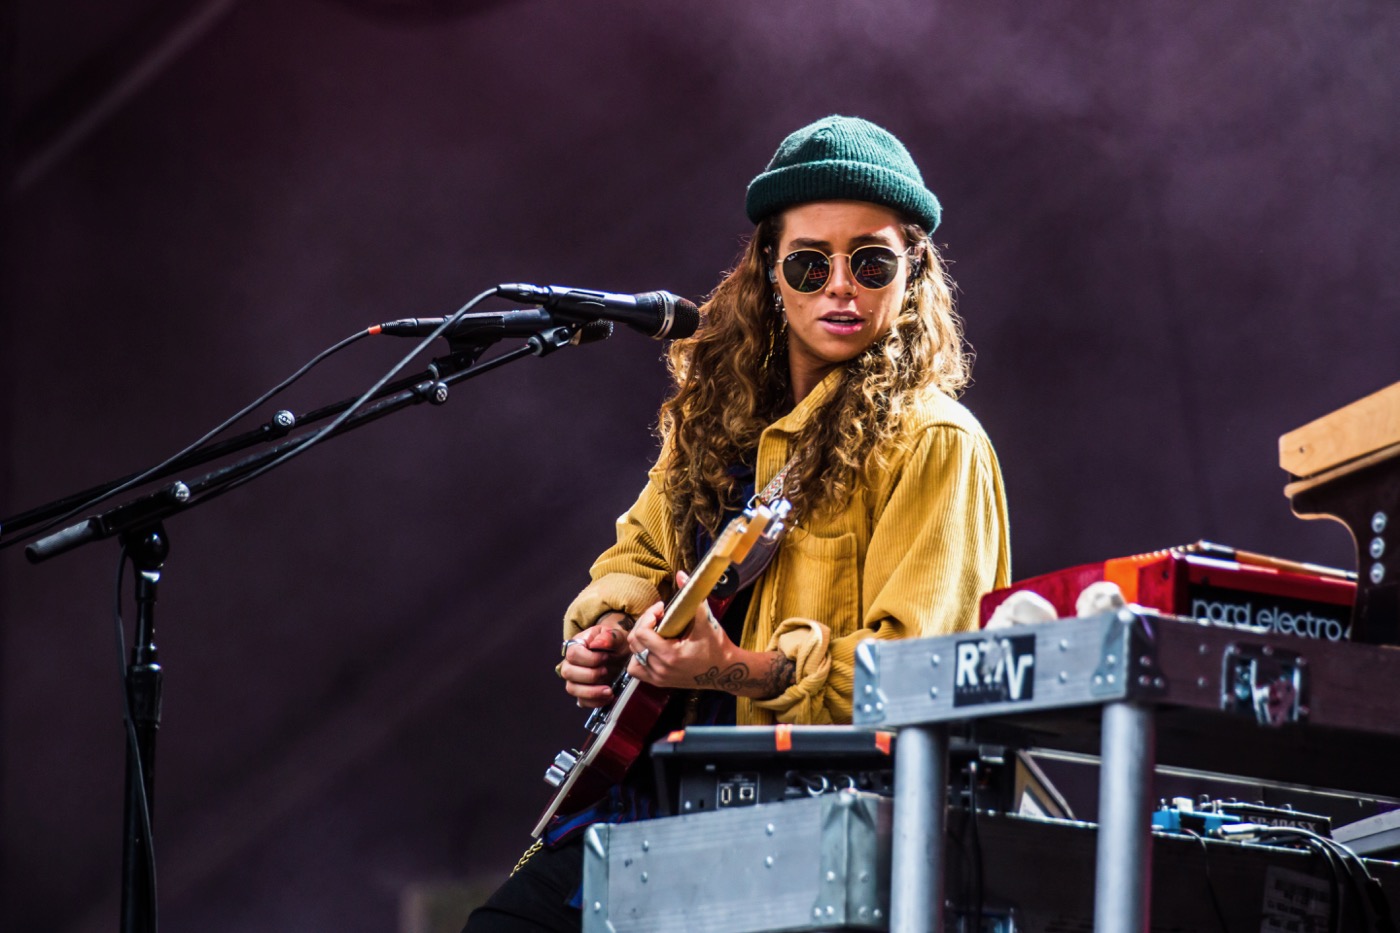 Tash Sultana Teased Outside Lands With Her "Flow State" - Blurred...